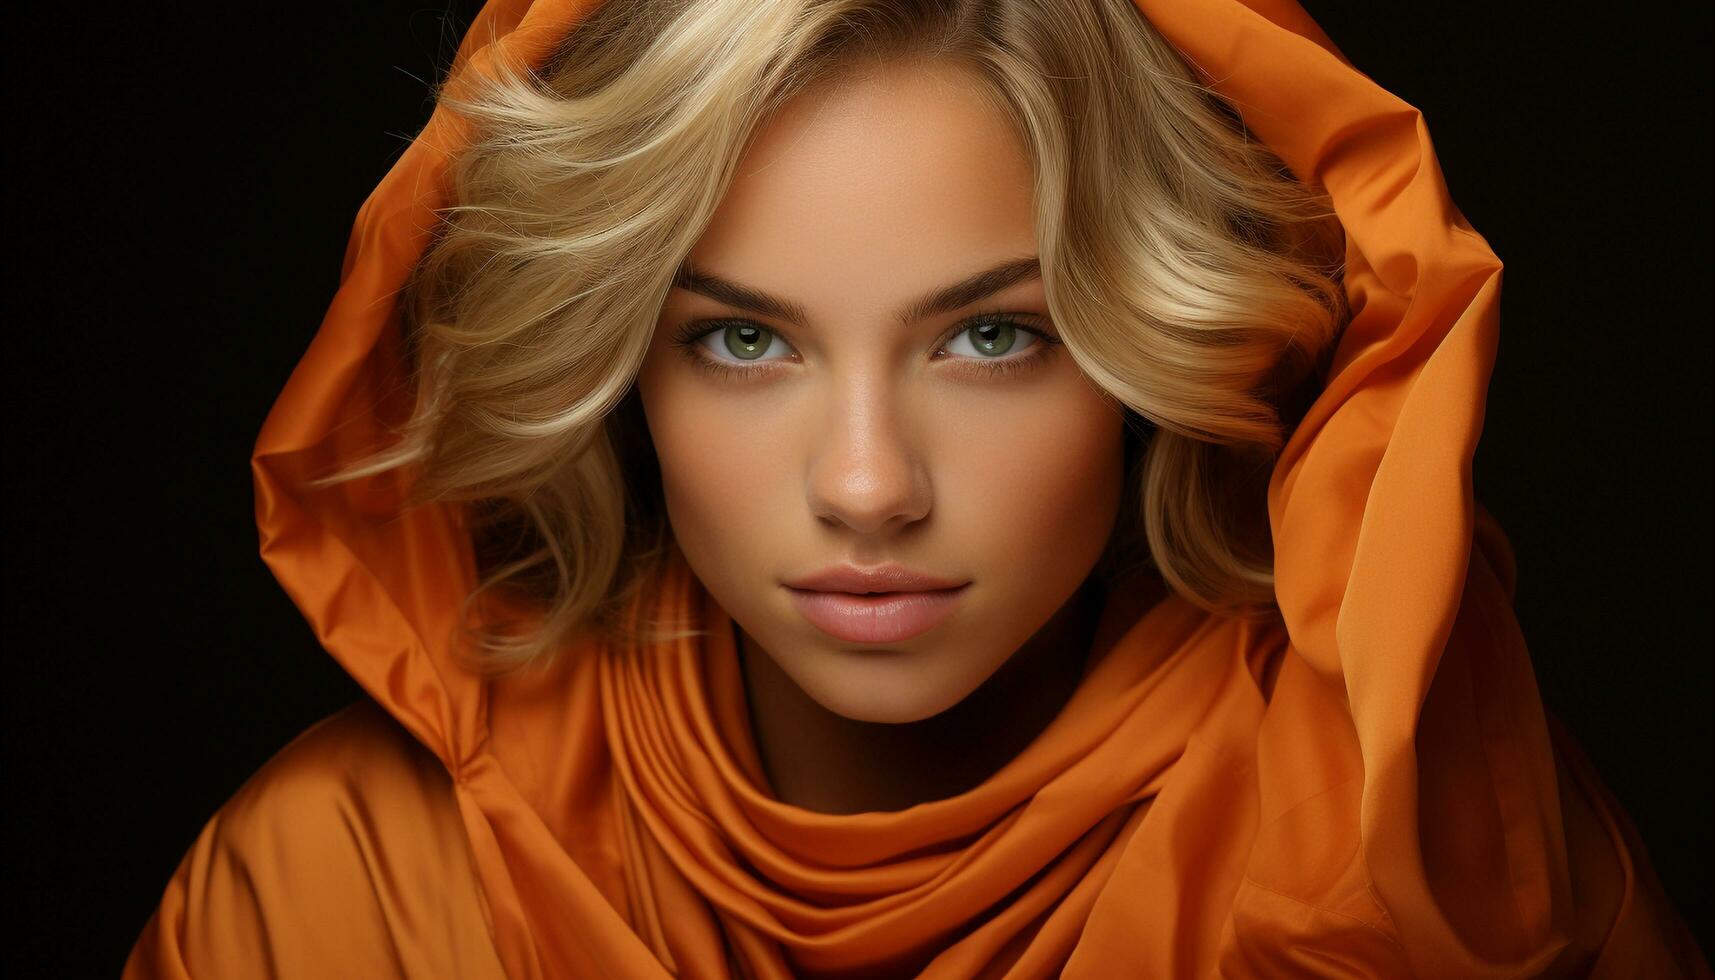 A beautiful young woman with blond hair and a cute smile generated by AI photo